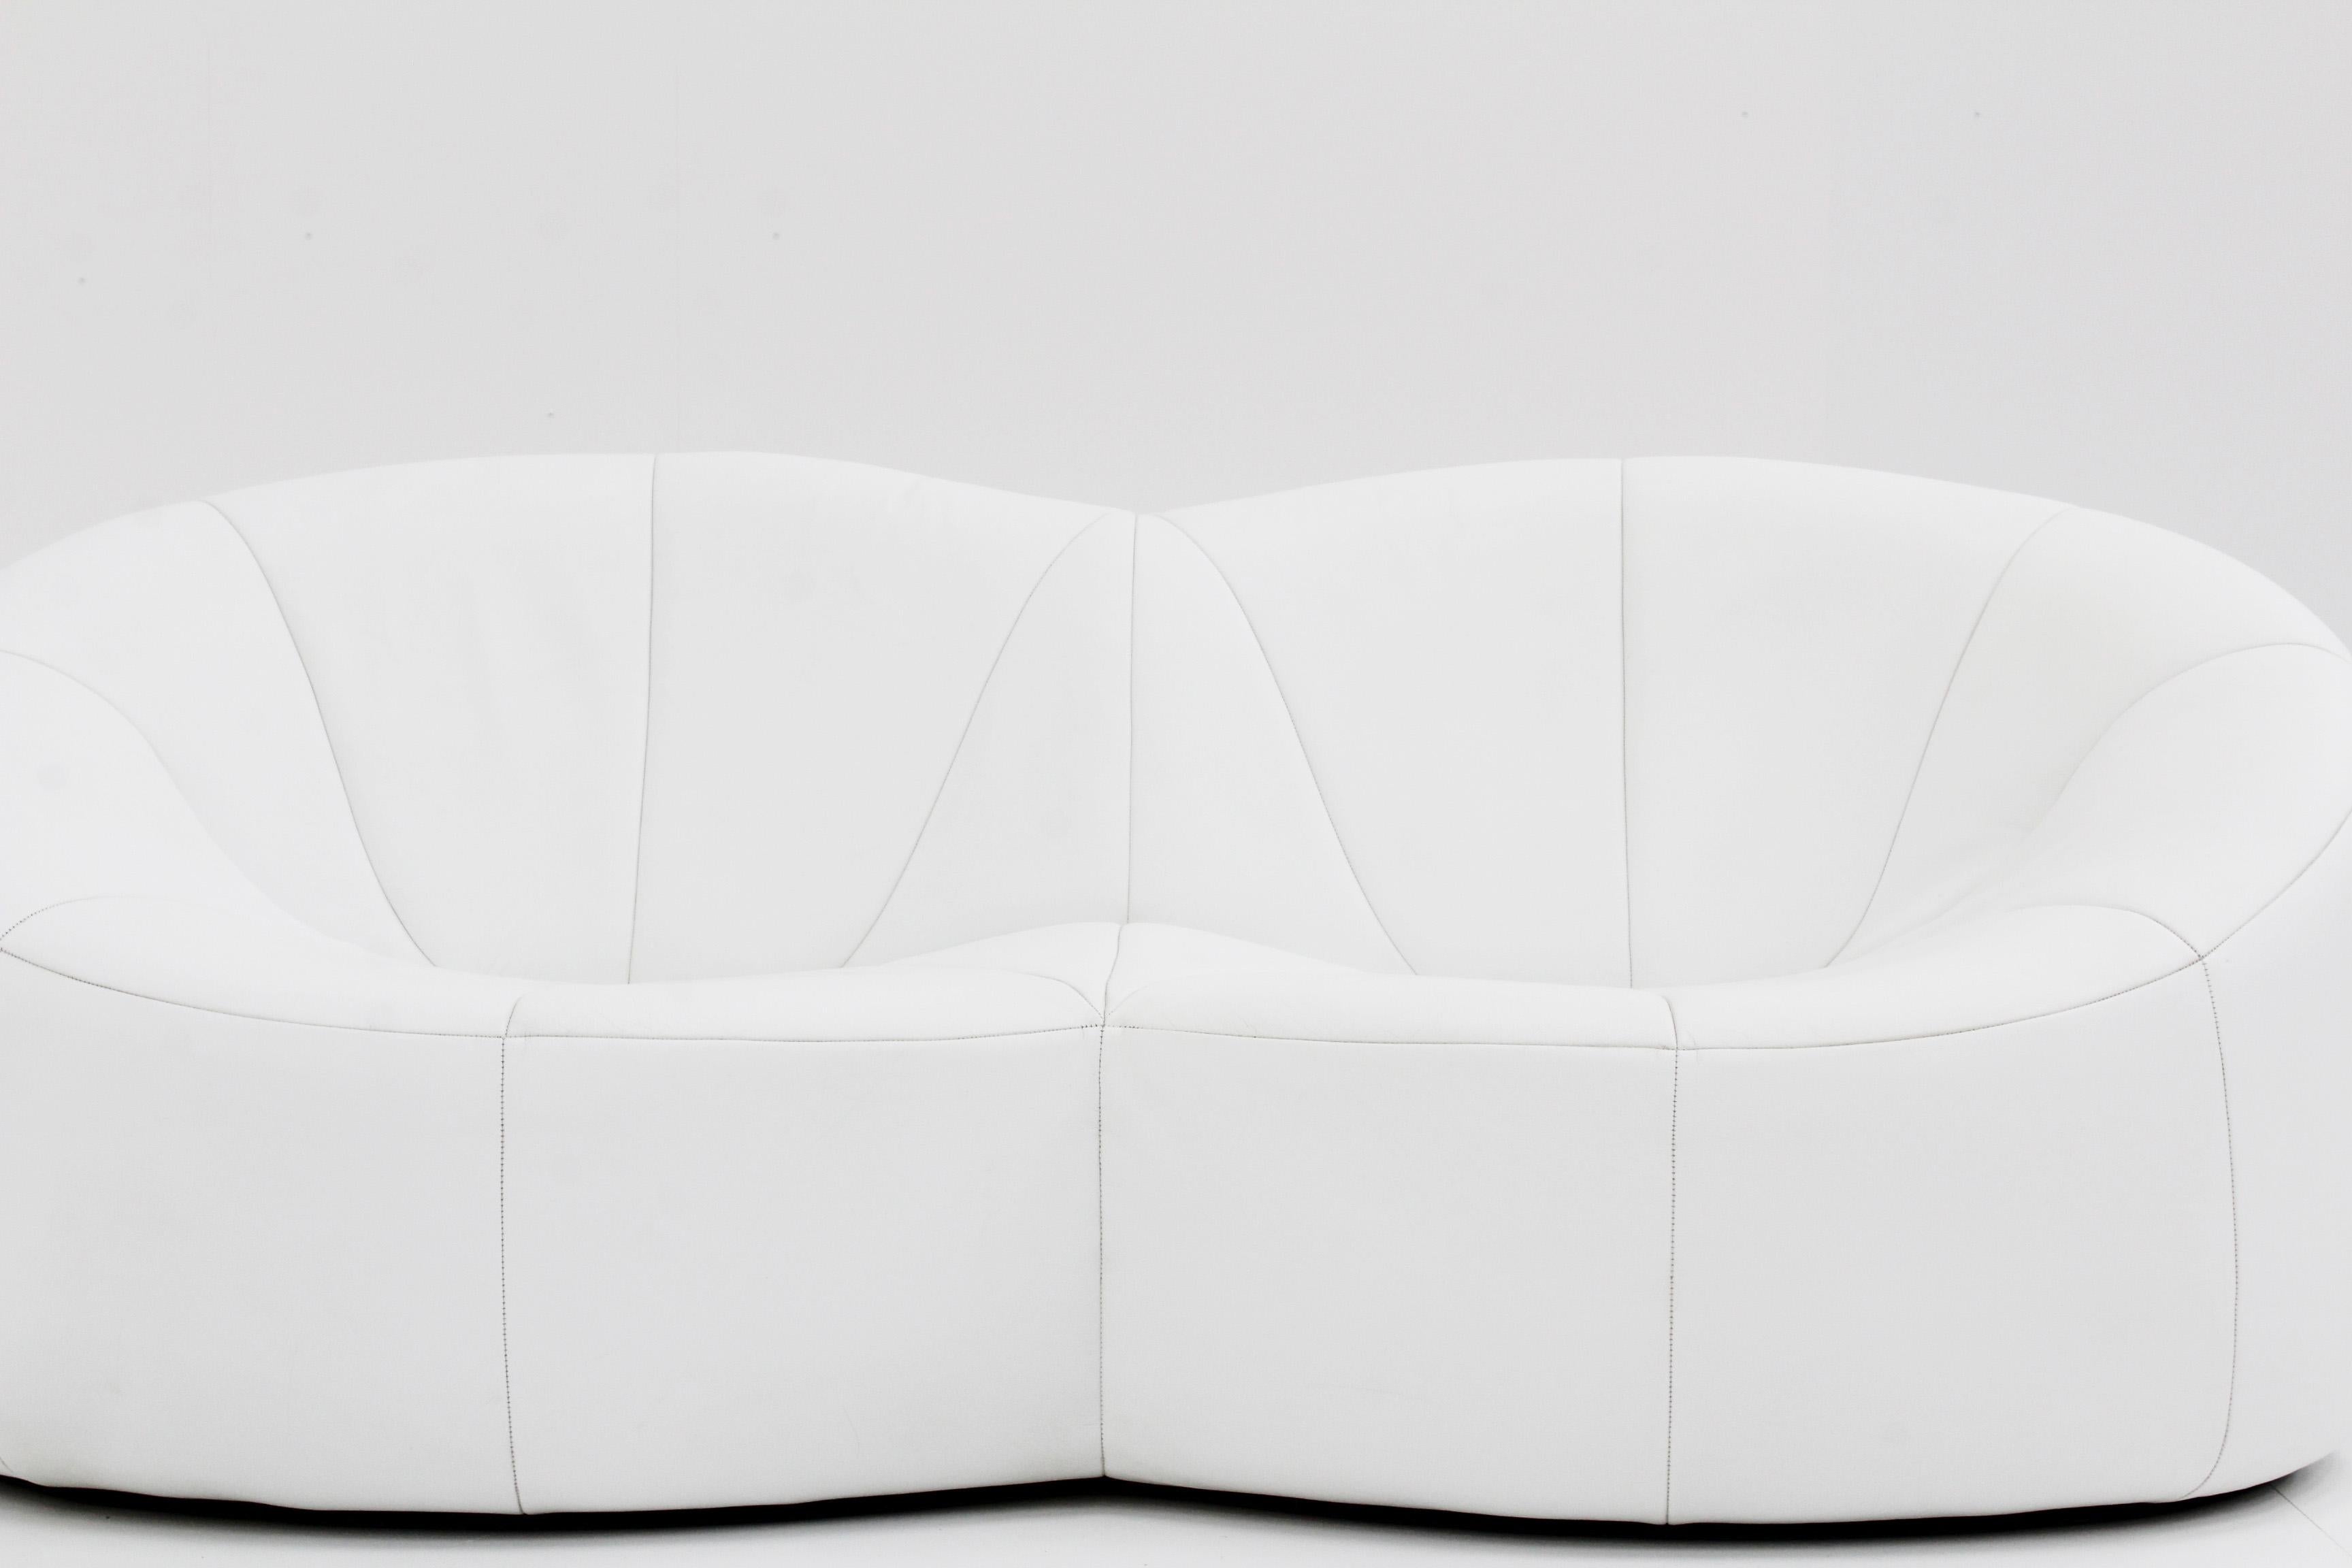 Pumpkin 2-seater sofa designed by Pierre Paulin for Ligne Roset. In its original white leather cattle hide. The leather is in a good condition with traces of use consistent with age. The pumpkin collection is known for its soft, organic, round